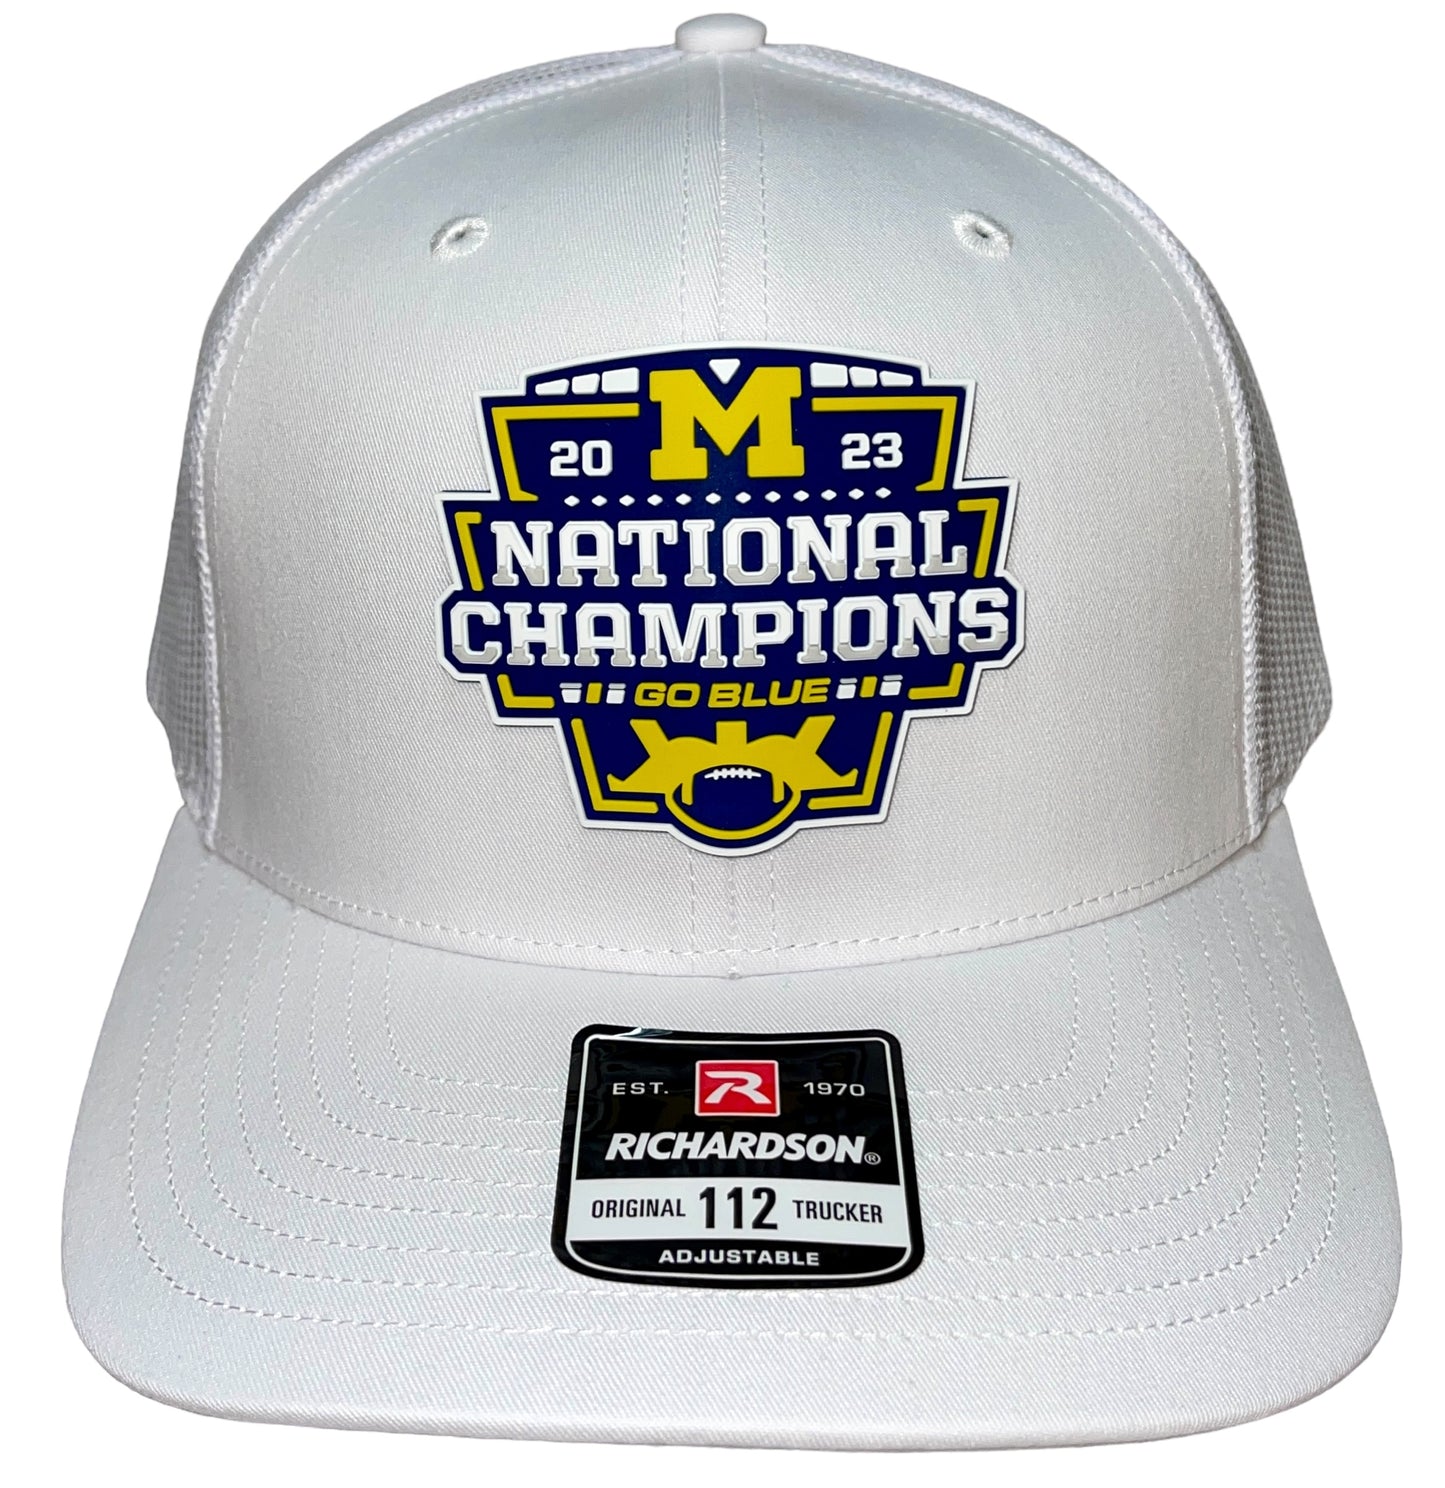 Michigan College Football Playoff 2023 National Champions 3D Snapback Trucker Hat- White - Ten Gallon Hat Co.